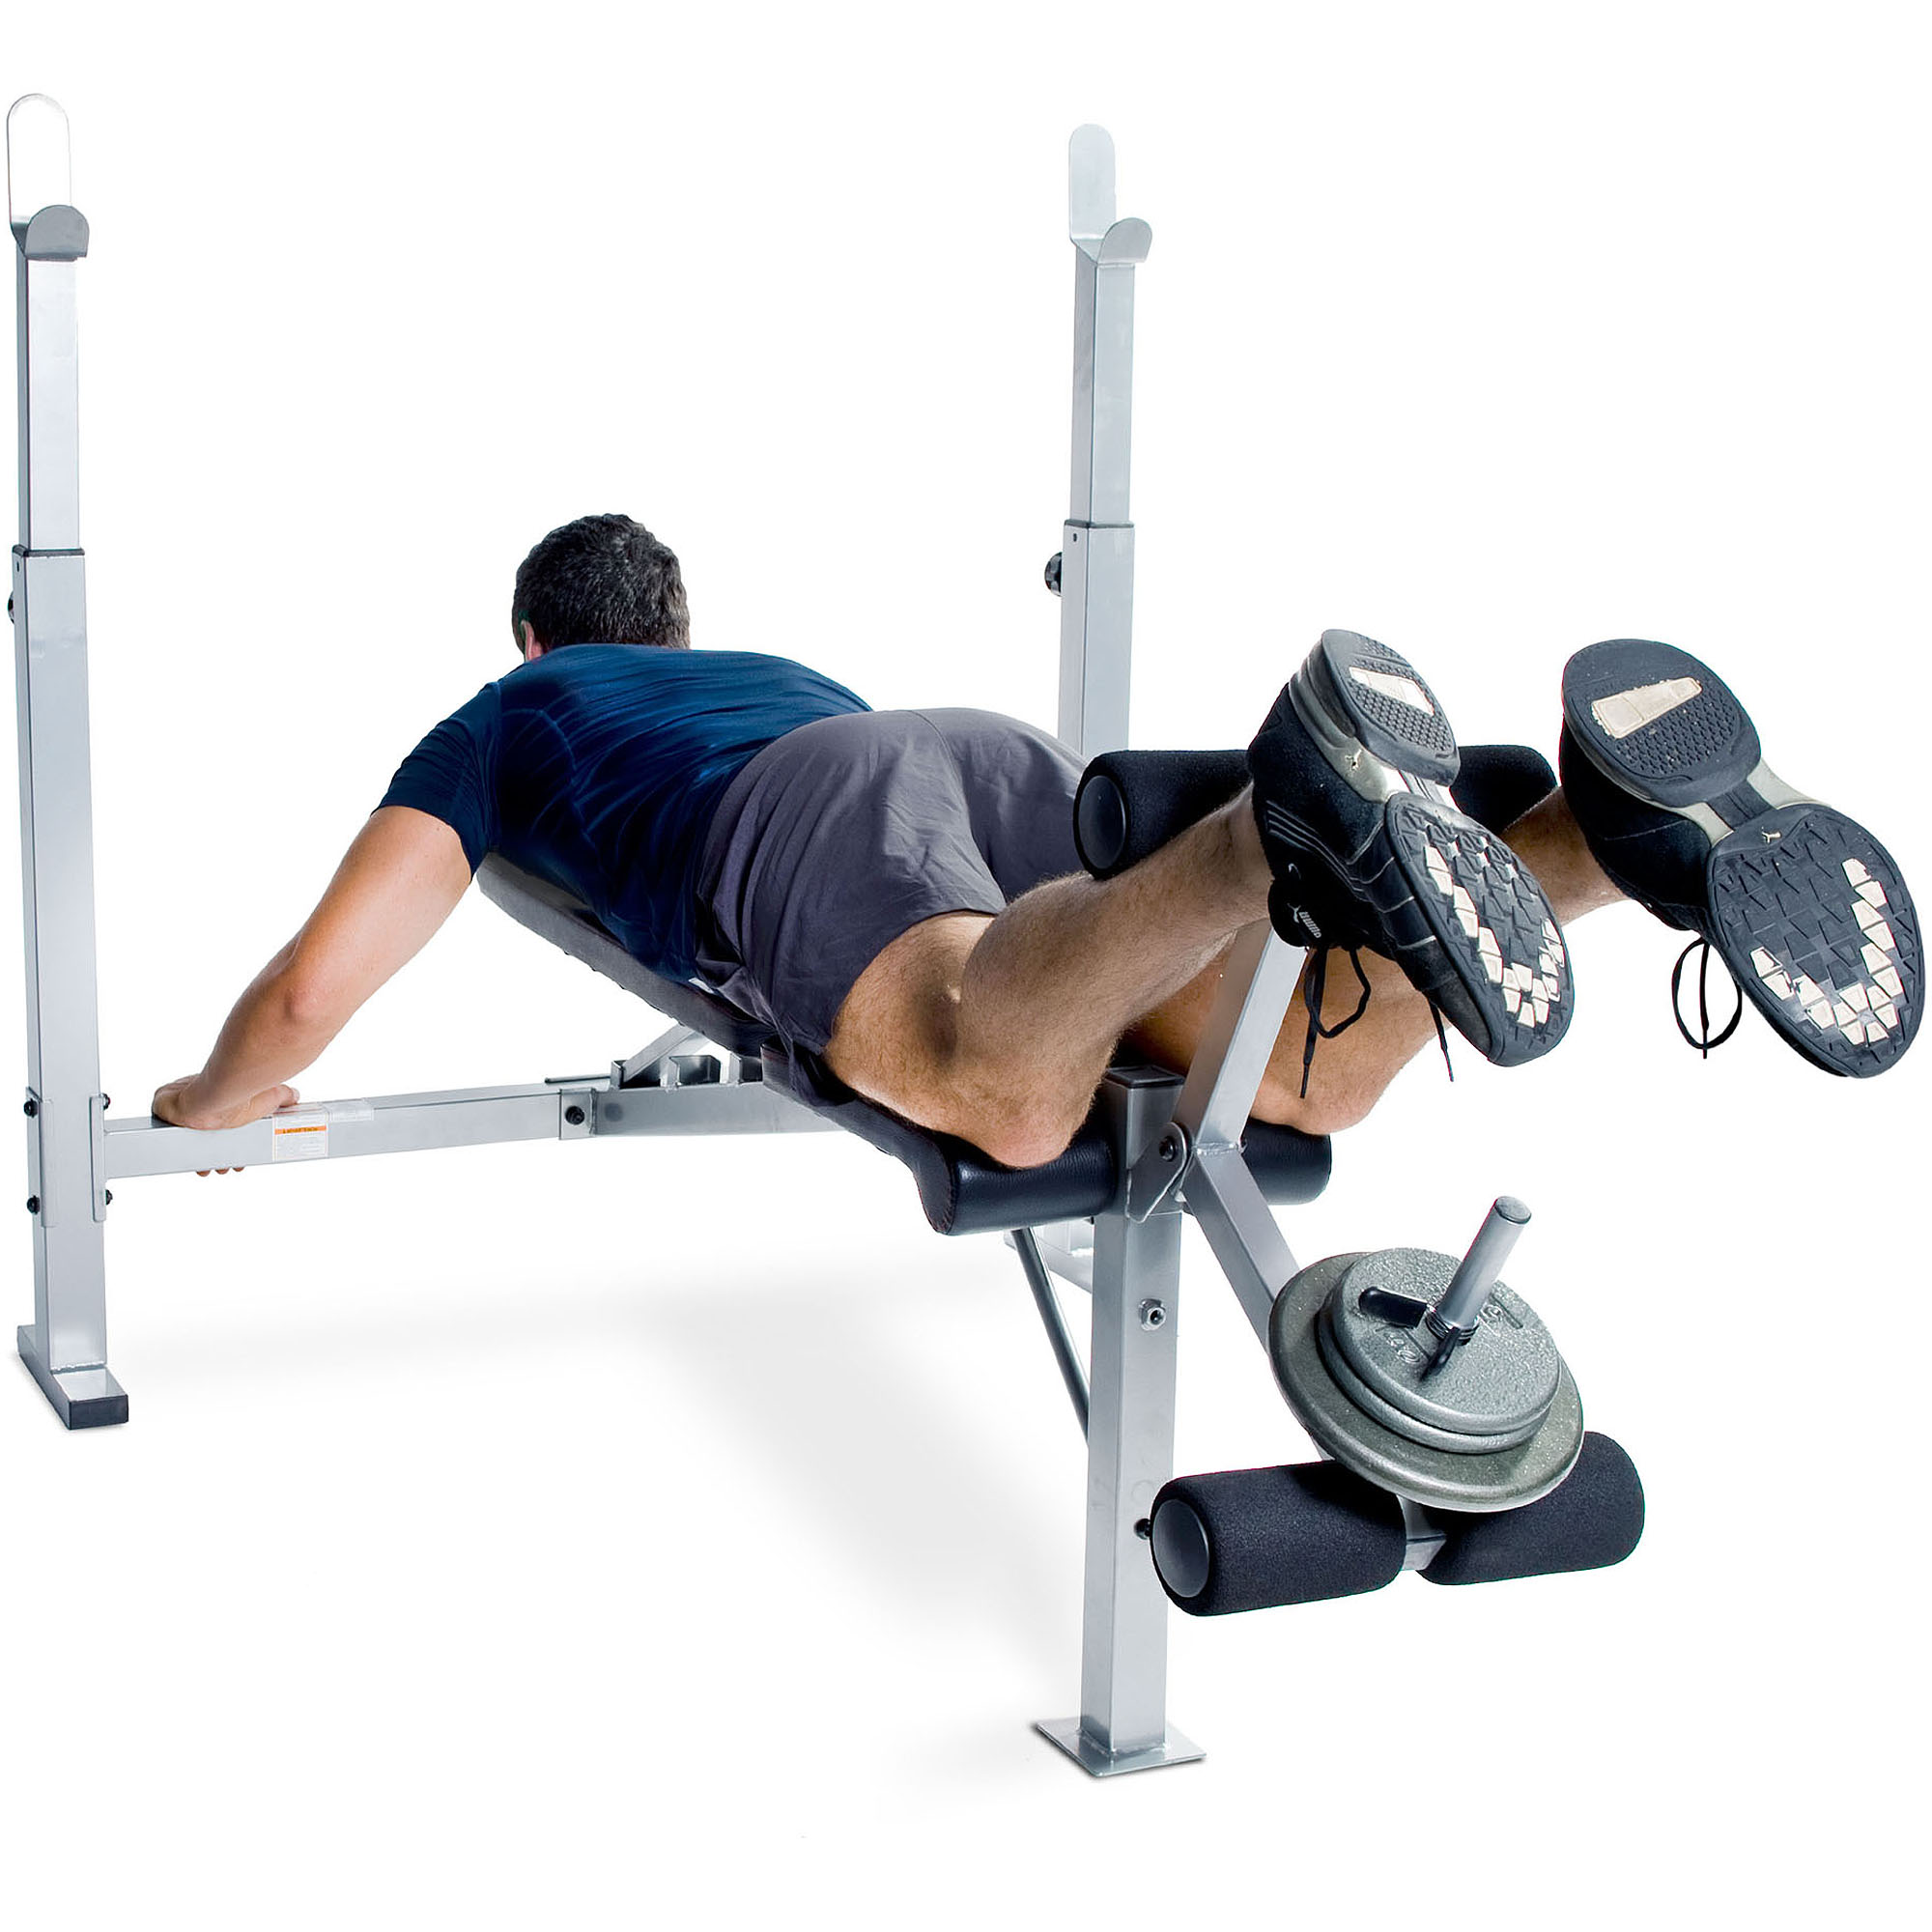 CAP Strength Olympic Weight Bench - image 3 of 6